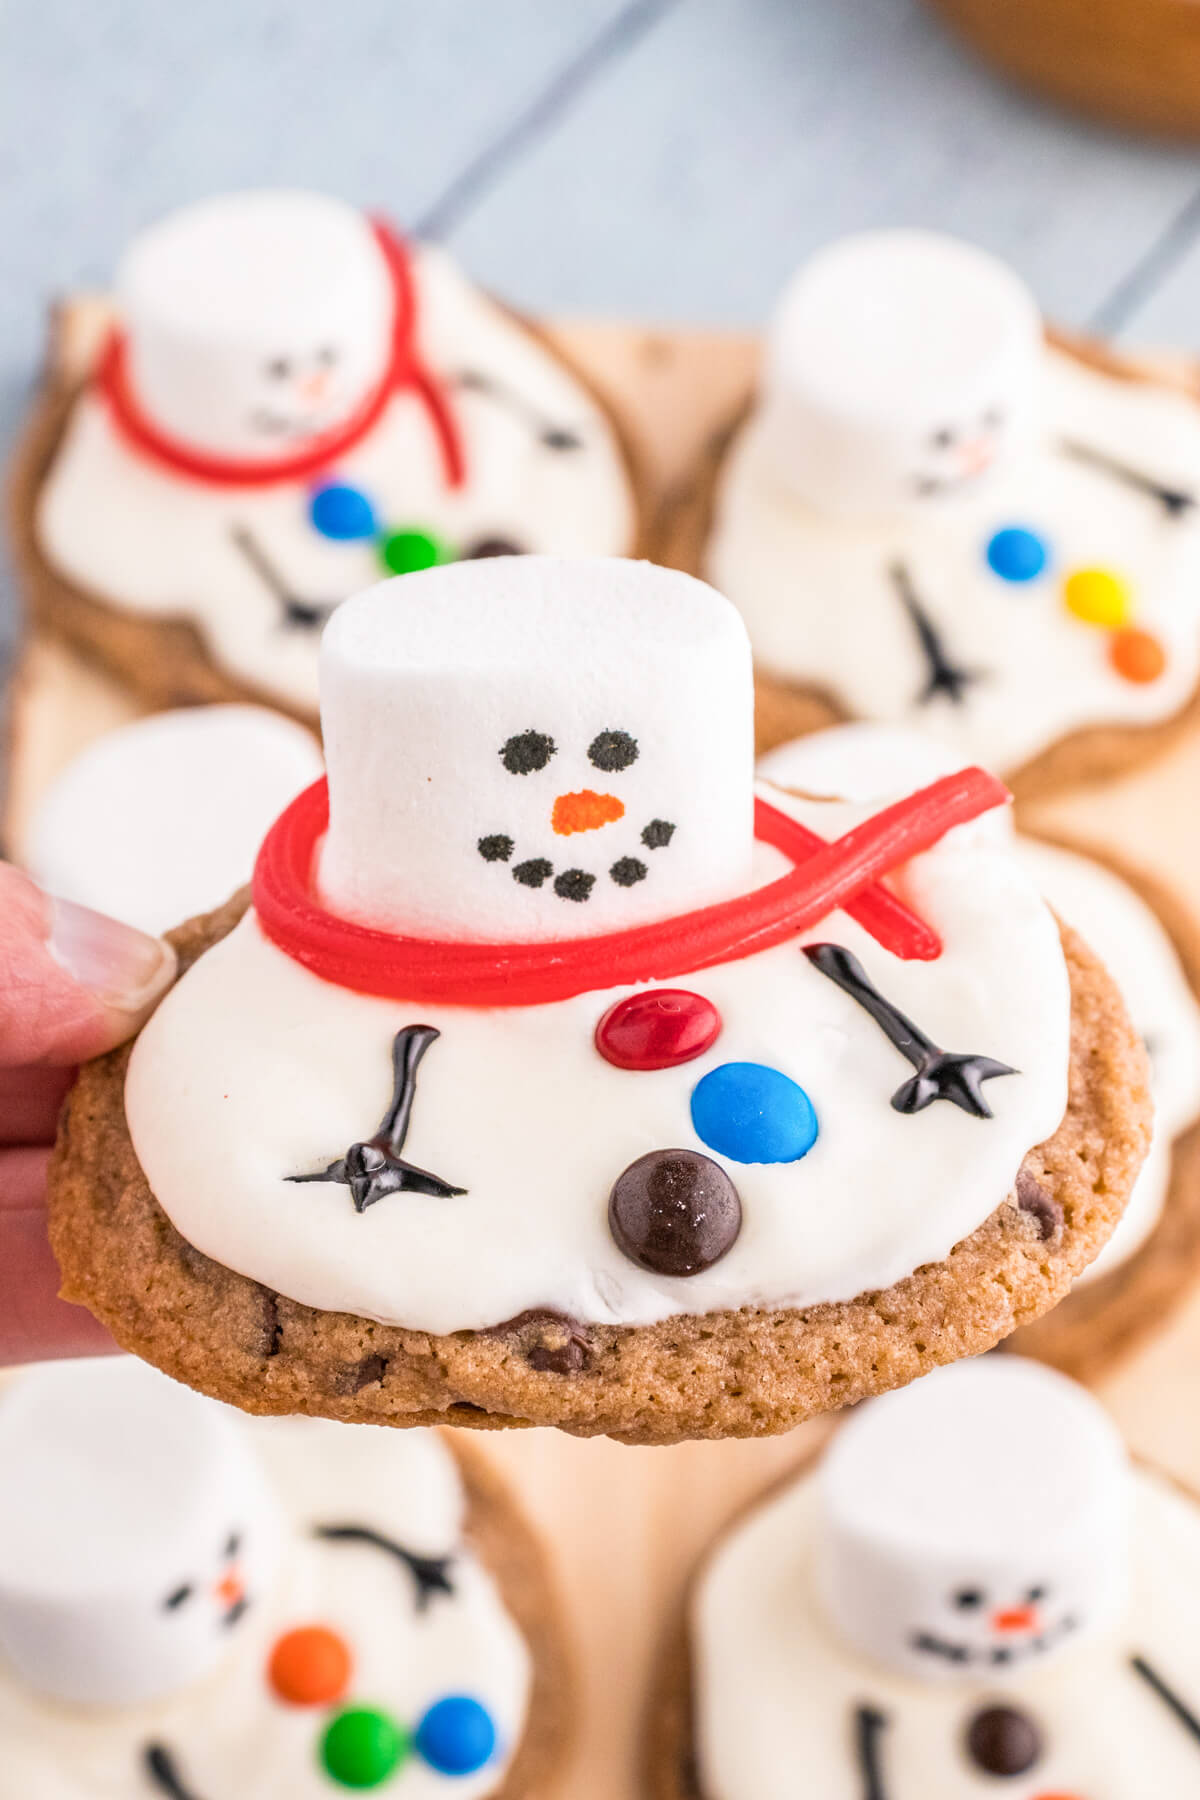 A group of Melted Snowman Cookies featuring white frosting on a chocolate chip cookie decorated with a marshmallow snowman.